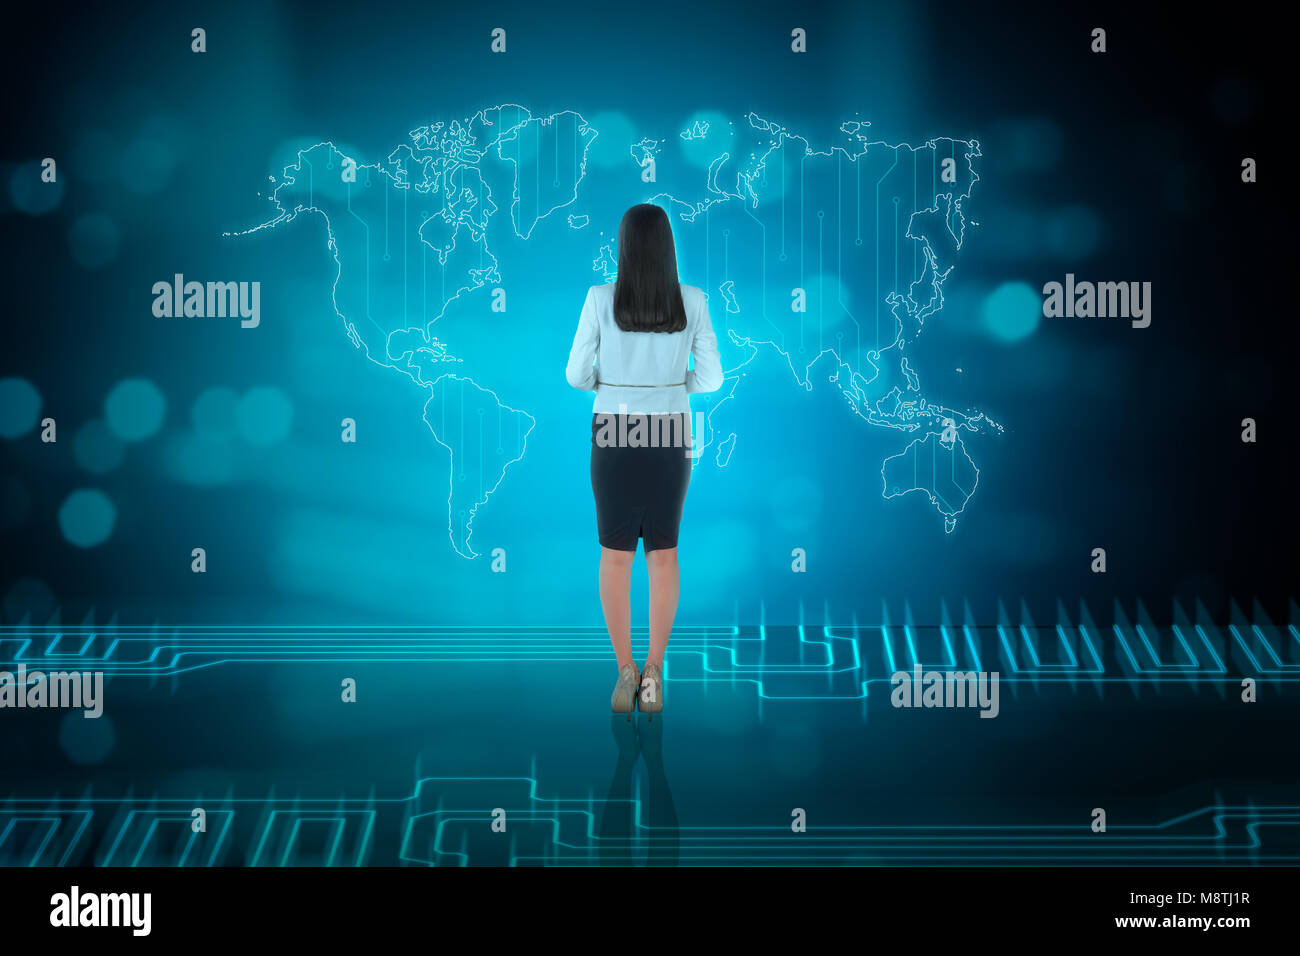 Rear view of asian business woman looking at business network on digital world map Stock Photo